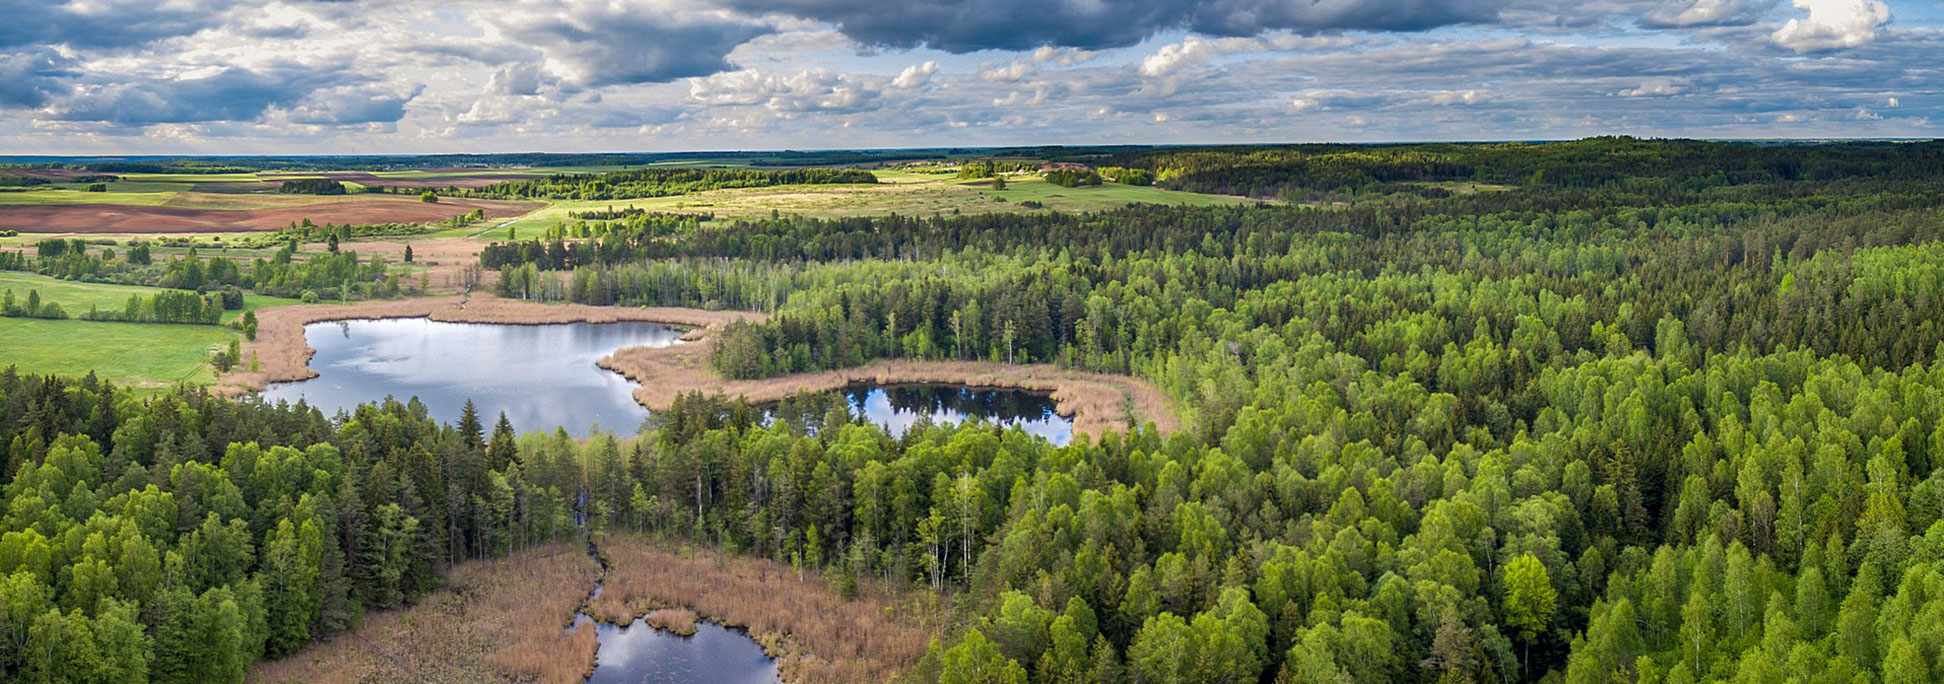 Typical Lithuanian landscape with lakes, swamps and forests.